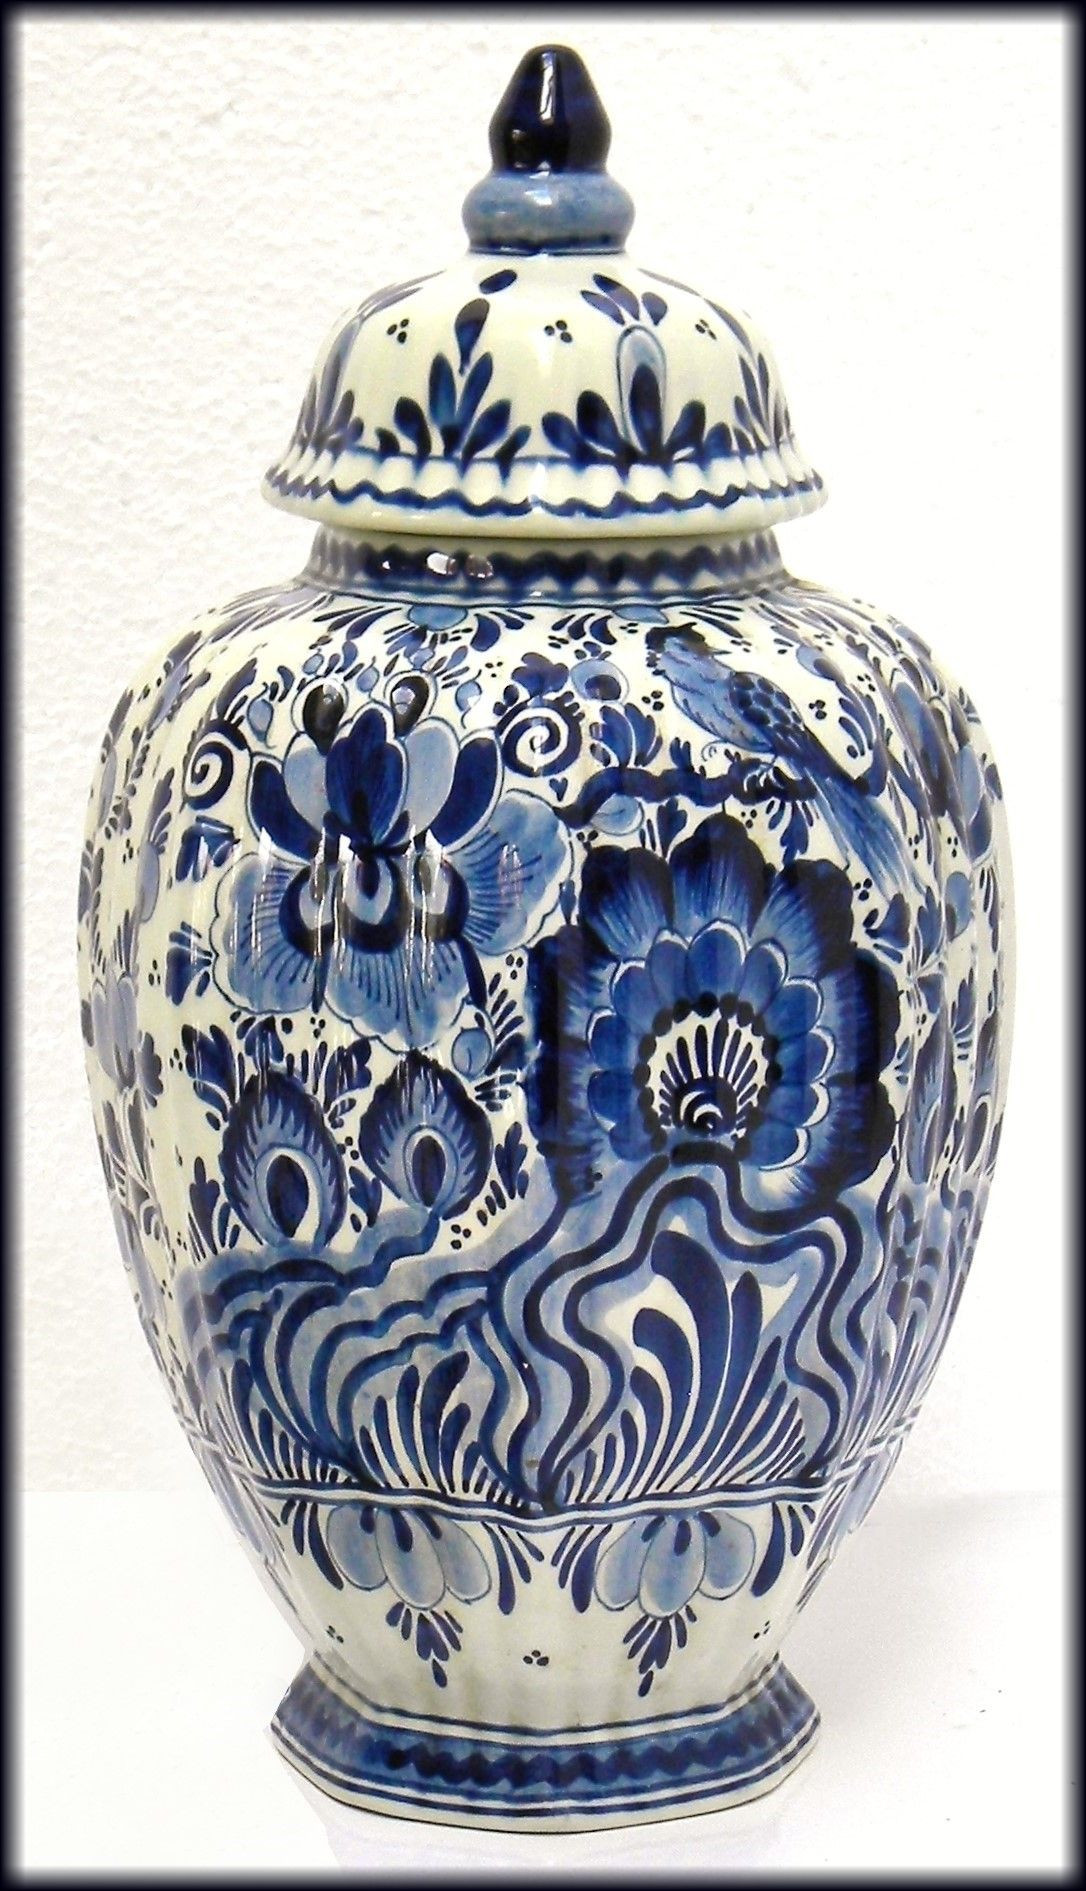 22 Best Small Blue and White Vase 2024 free download small blue and white vase of vintage delft blue ceramic vase jar hand painted cobalt blue floral with amazing delft blue vintage dutch art pottery with cobalt blue bird and floral decoration